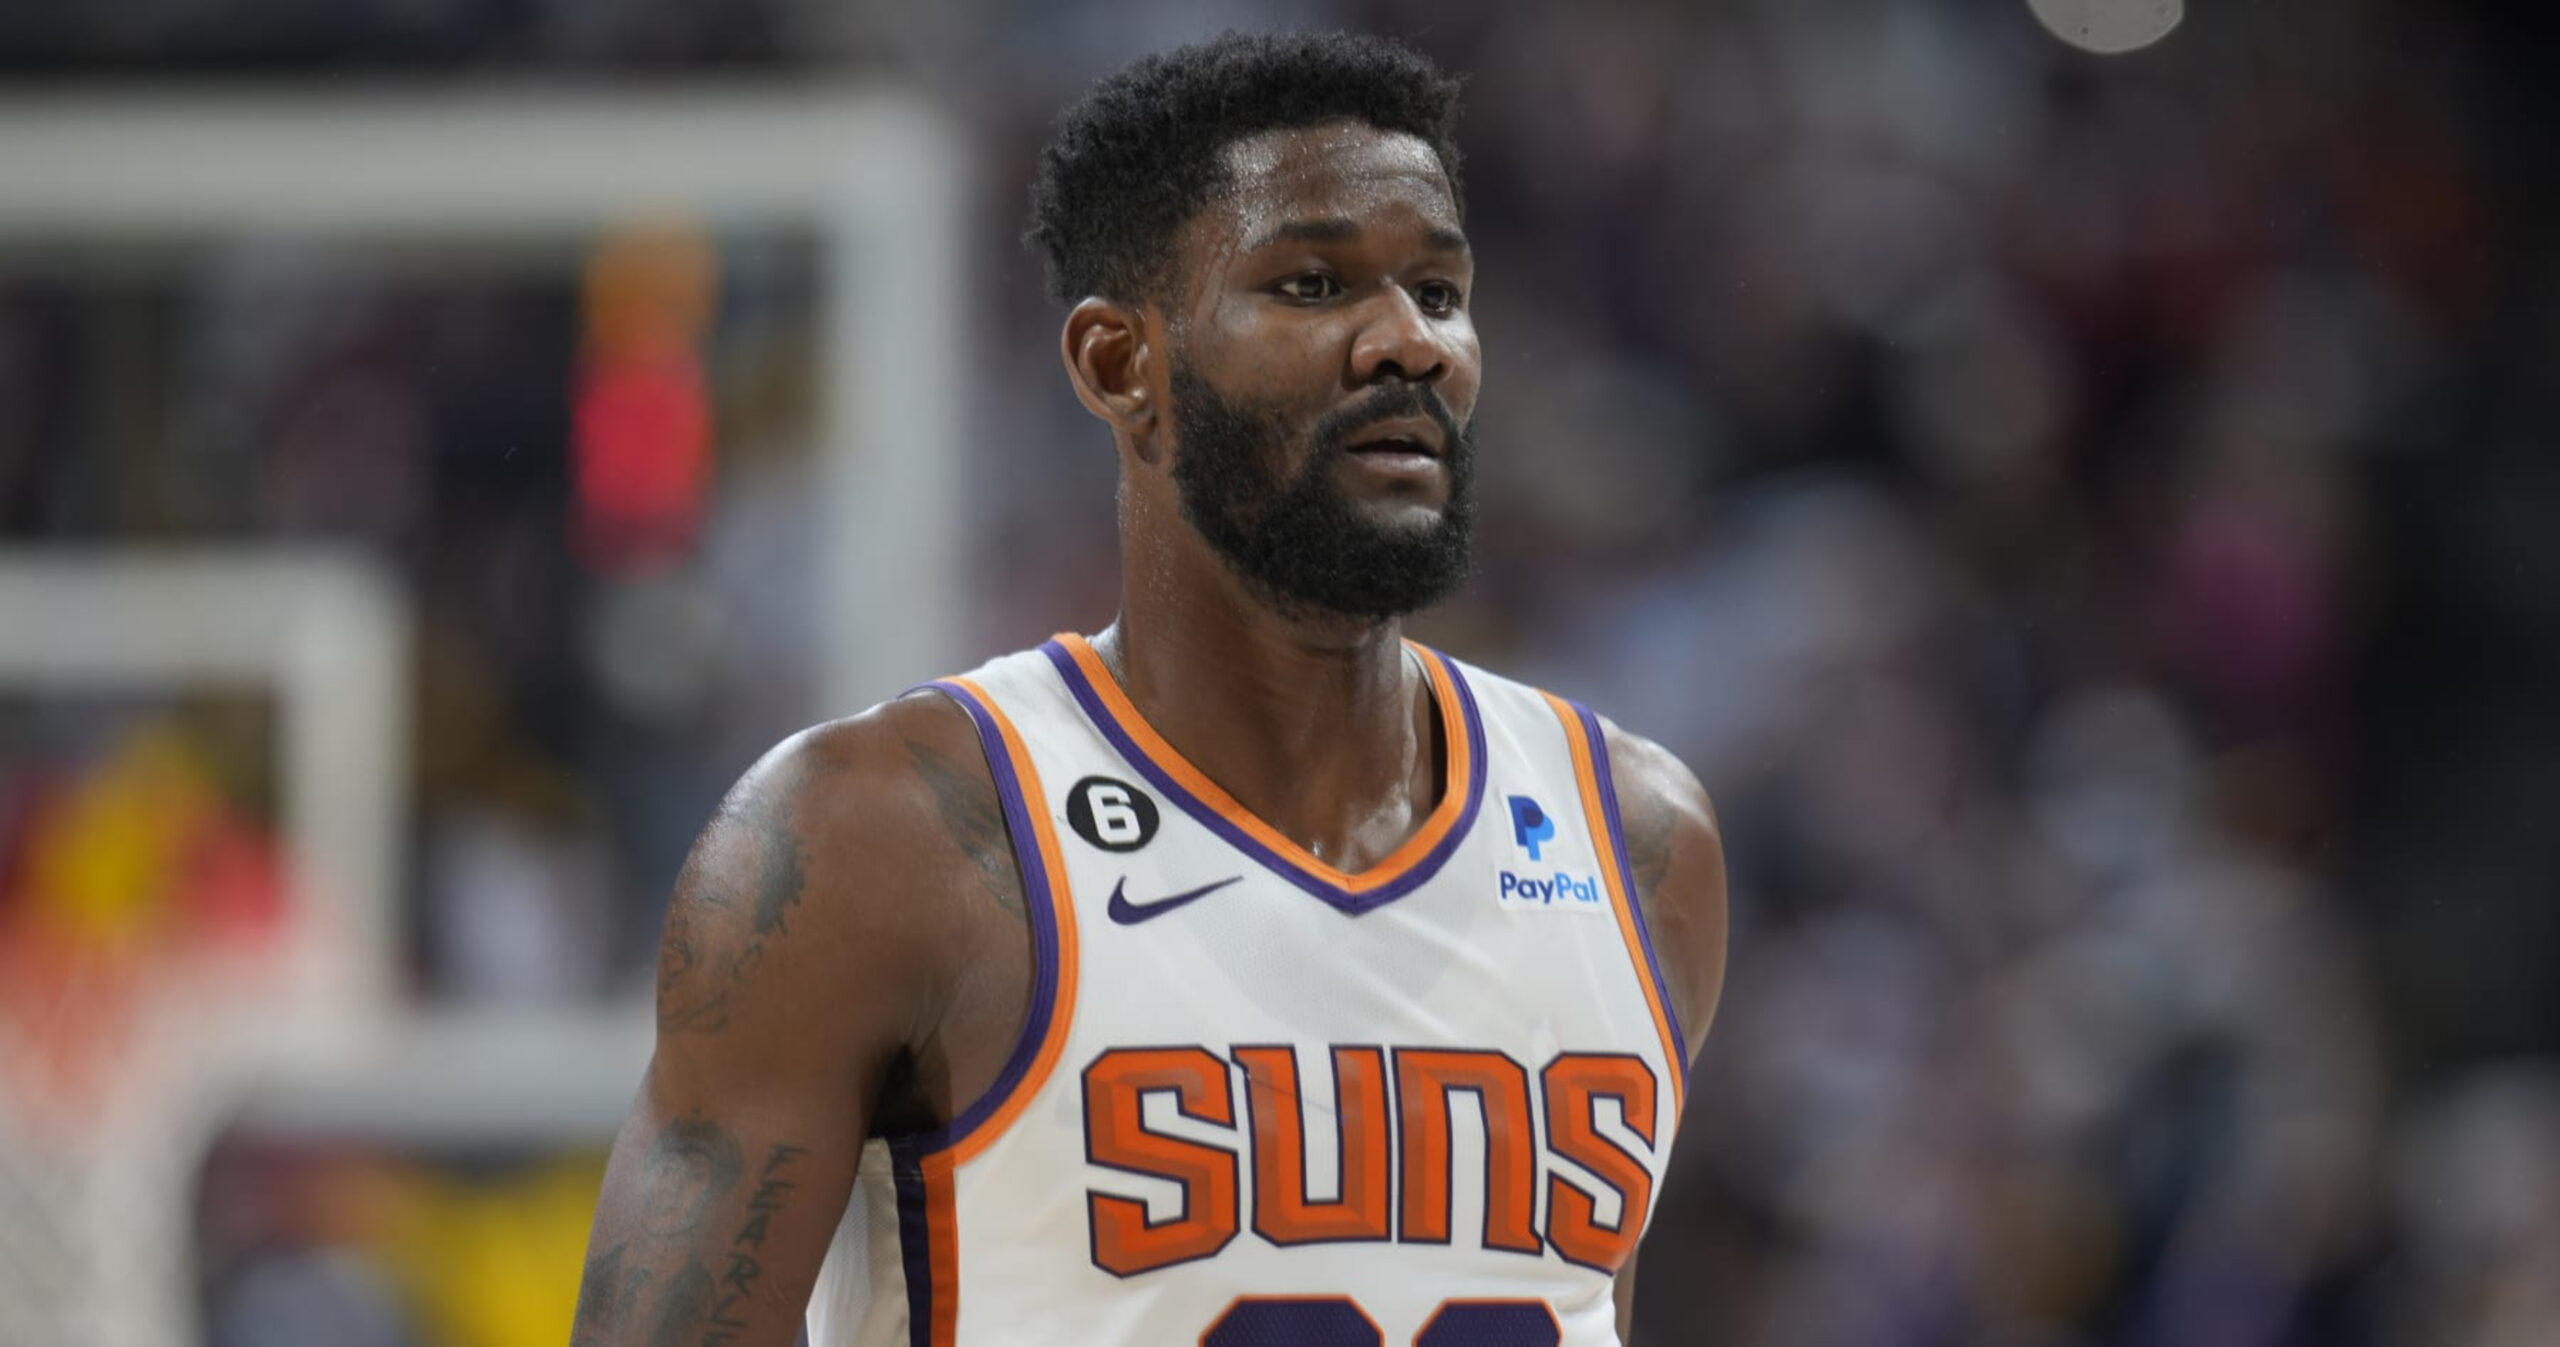 Golden State Warriors to Acquire Deandre Ayton from the Phoenix Suns in a Bold Move